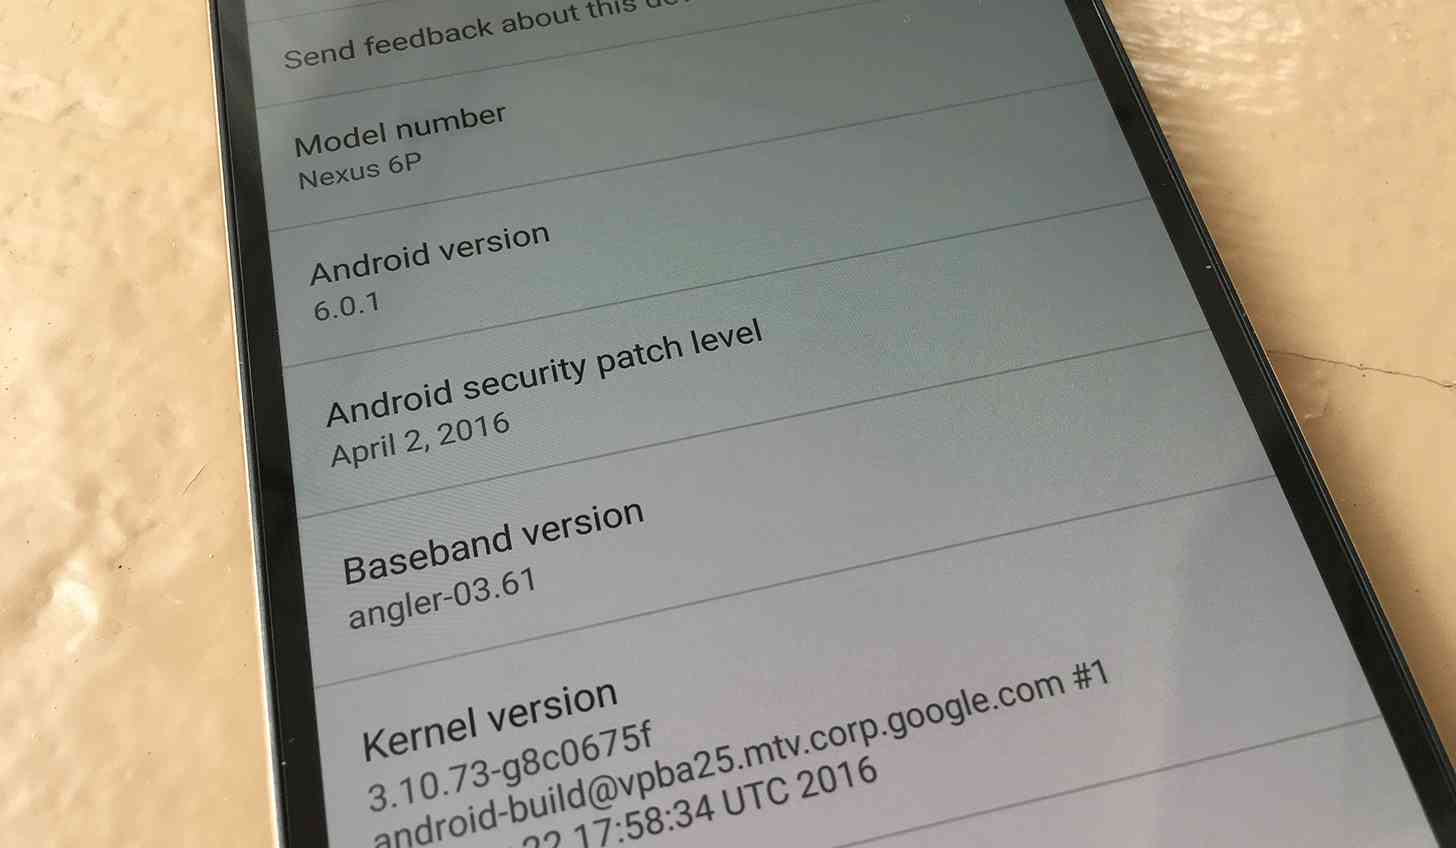 Android Security Patch Level Nexus 6P